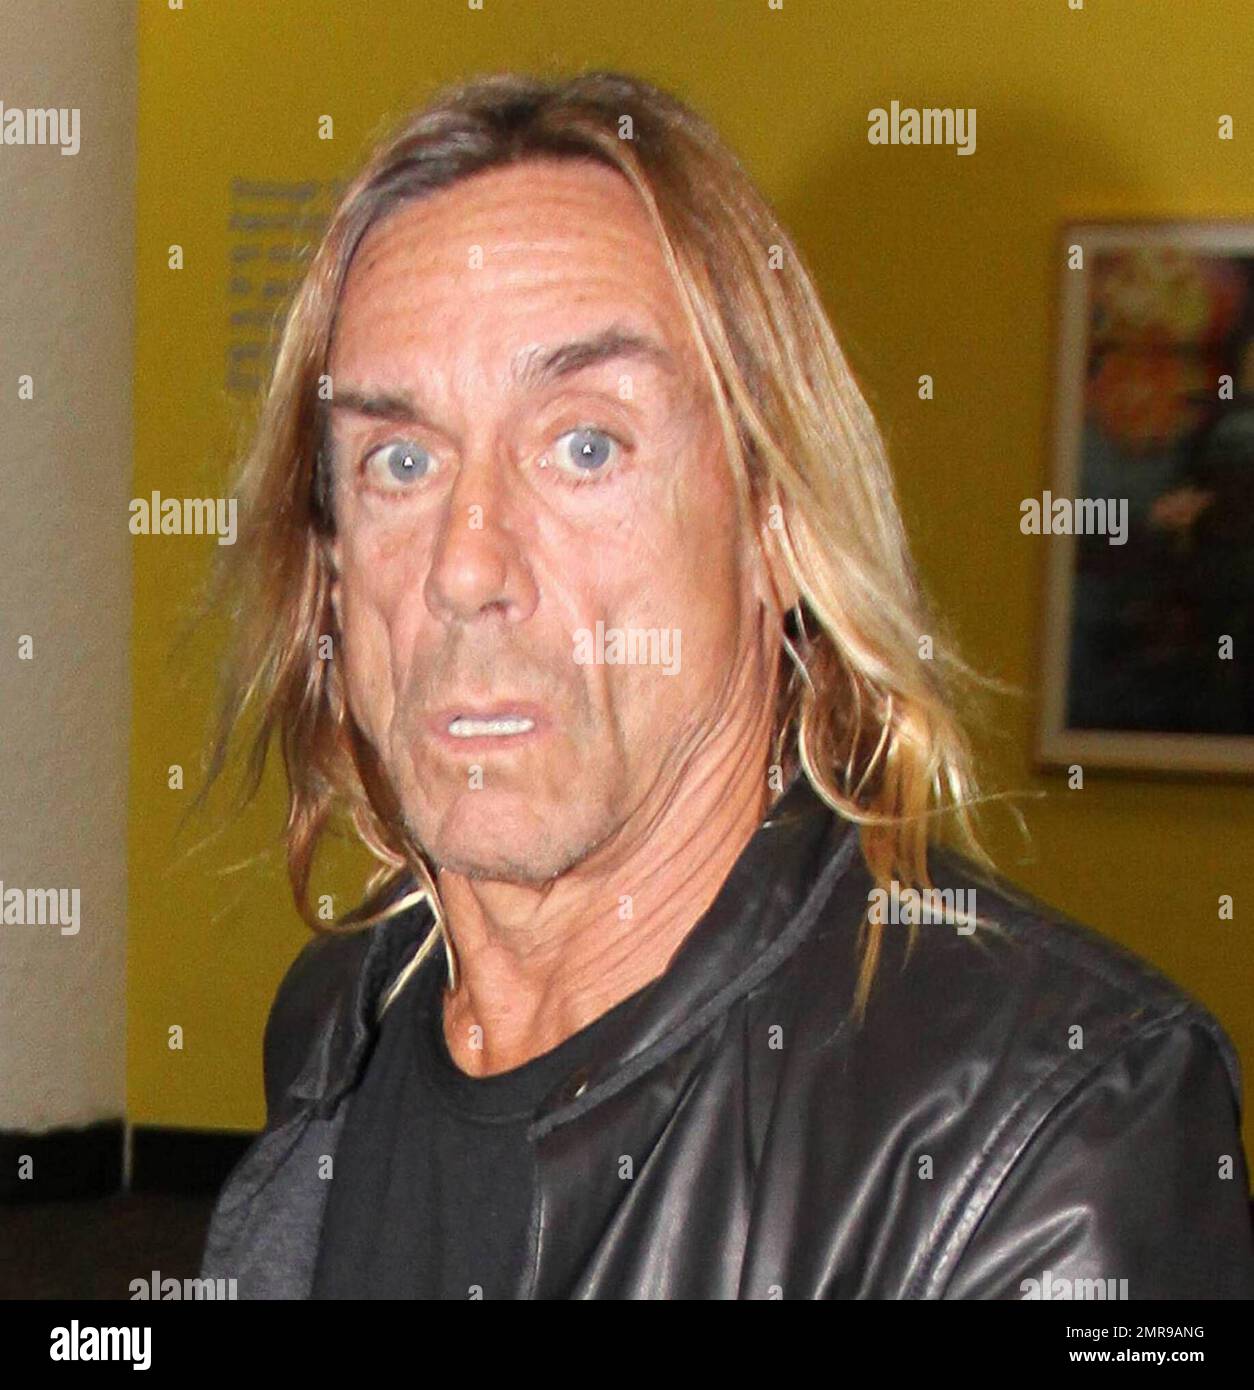 Exclusive!! Aging rock-star Iggy Pop arrives at Miami airport with his  girlfriend Nina Alu. Pop seemed to have trouble walking as he had a severe  limp. Miami, Fl. 4/2/09 Stock Photo -